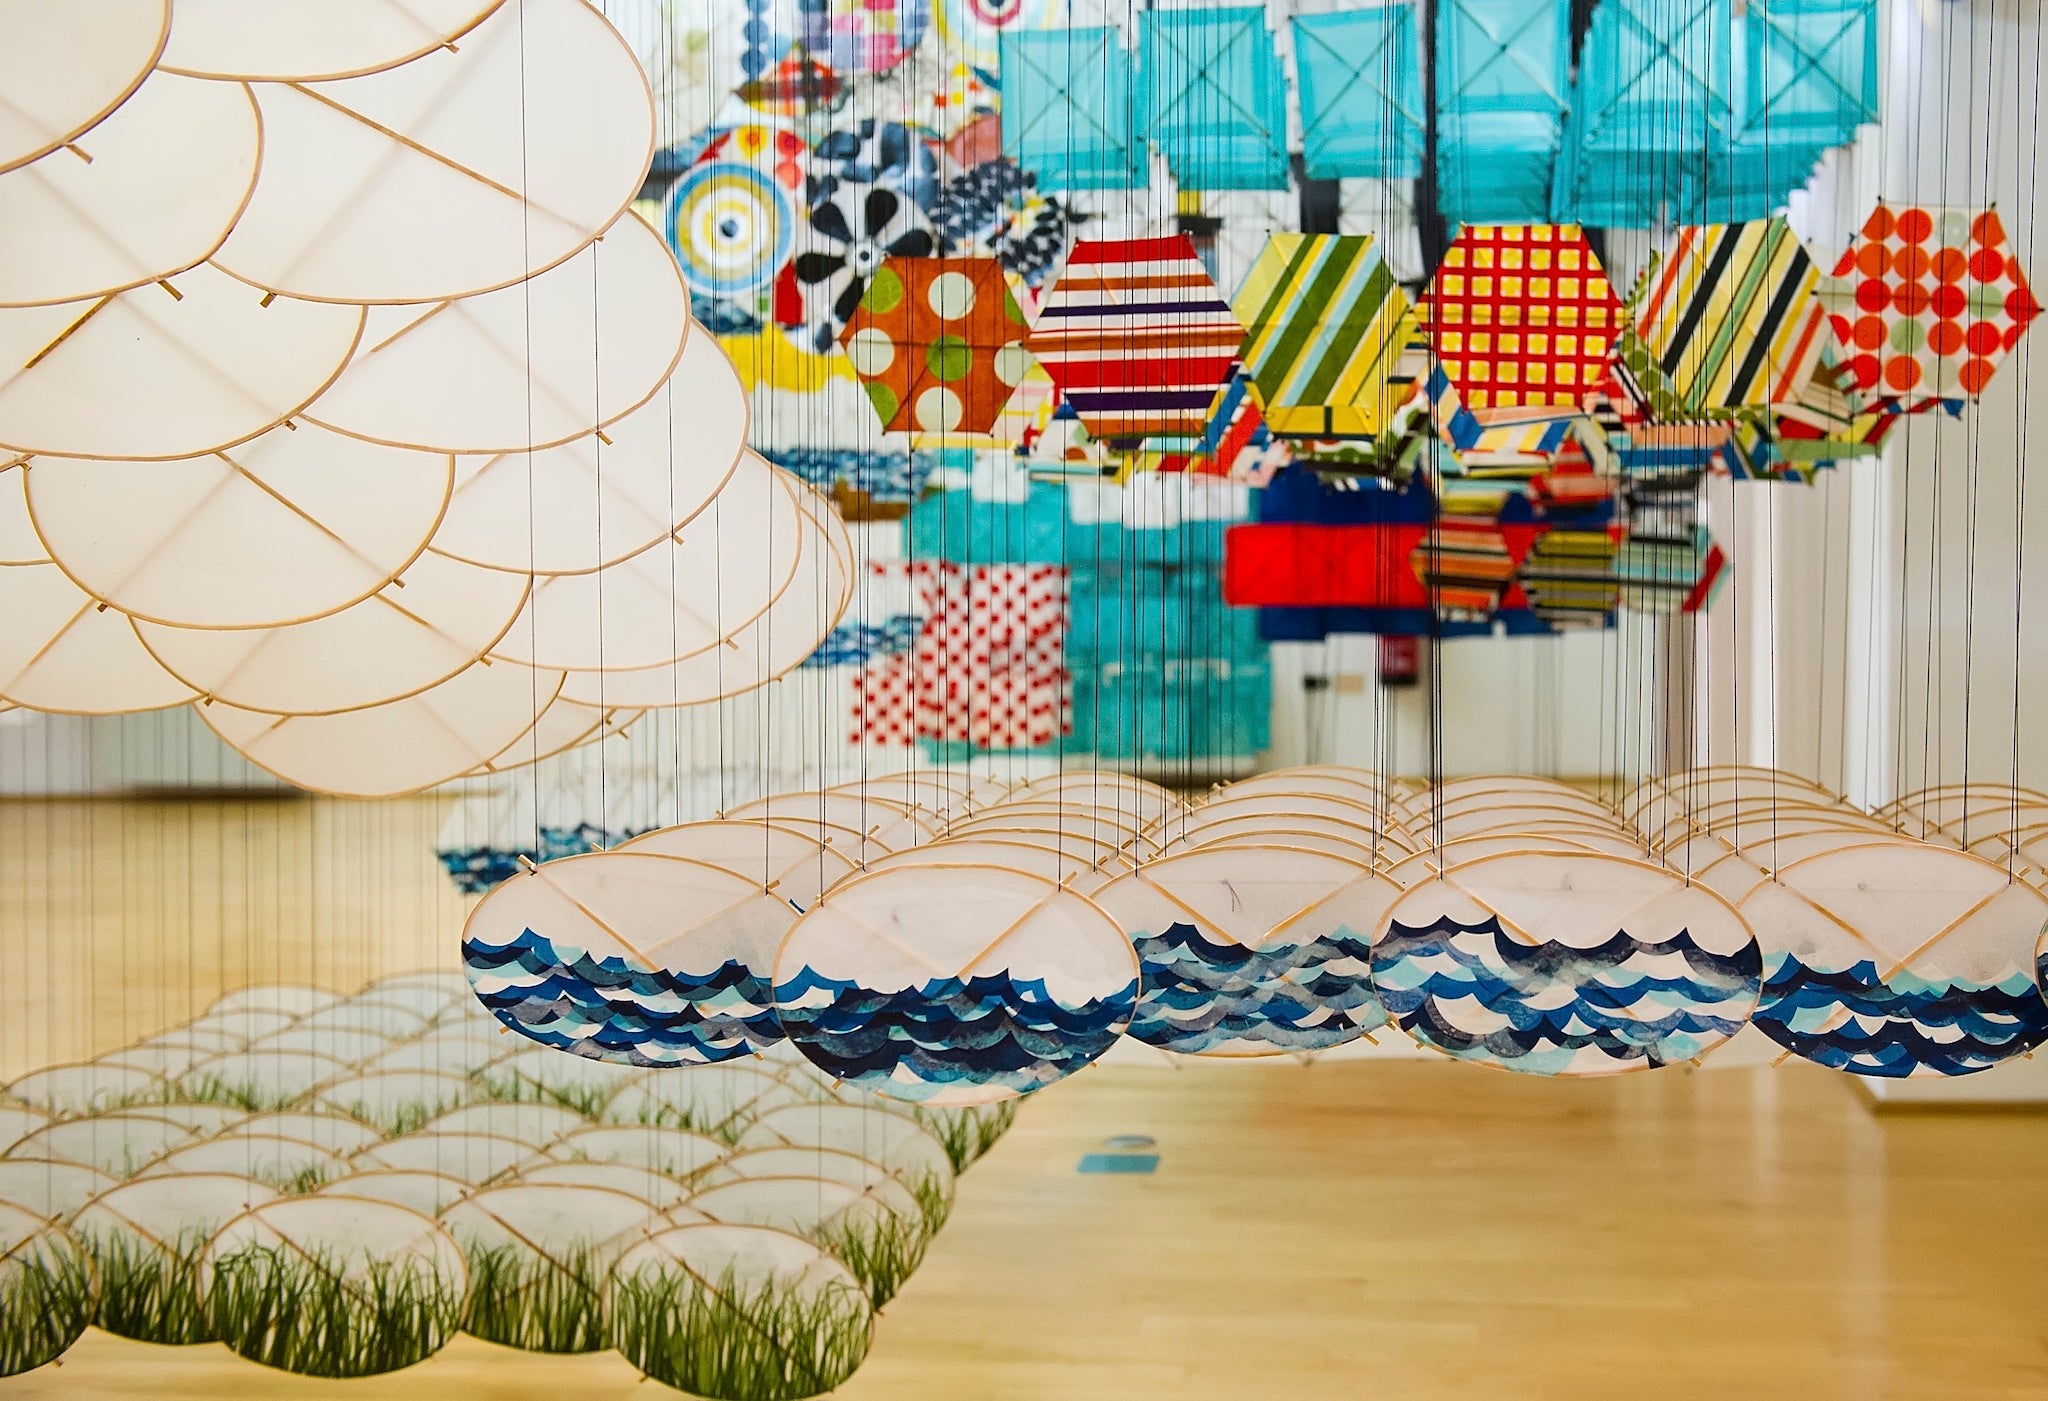 A general view during the press preview of 'Gas Giant' by Jacob Hashimoto, an installation composed of 7500 kites as part of the 55th International Art Exhibition on May 28, 2013 in Venice, Italy.